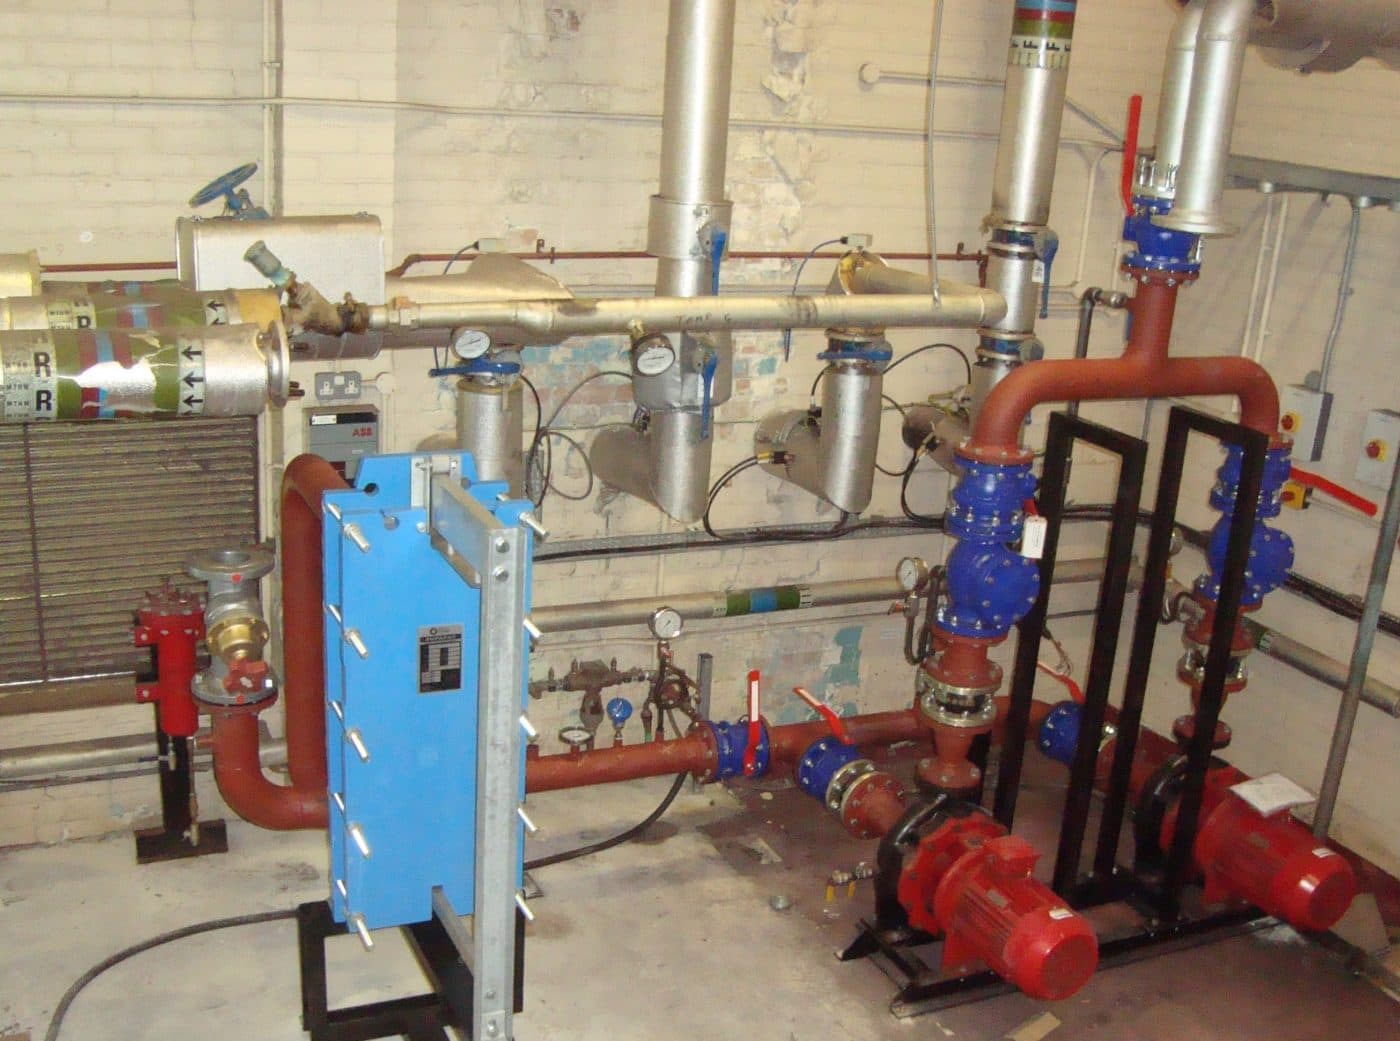 Heating Distribution Plant Room inc. Plate Heat Exchanger - Hot Water - Government Facility 4